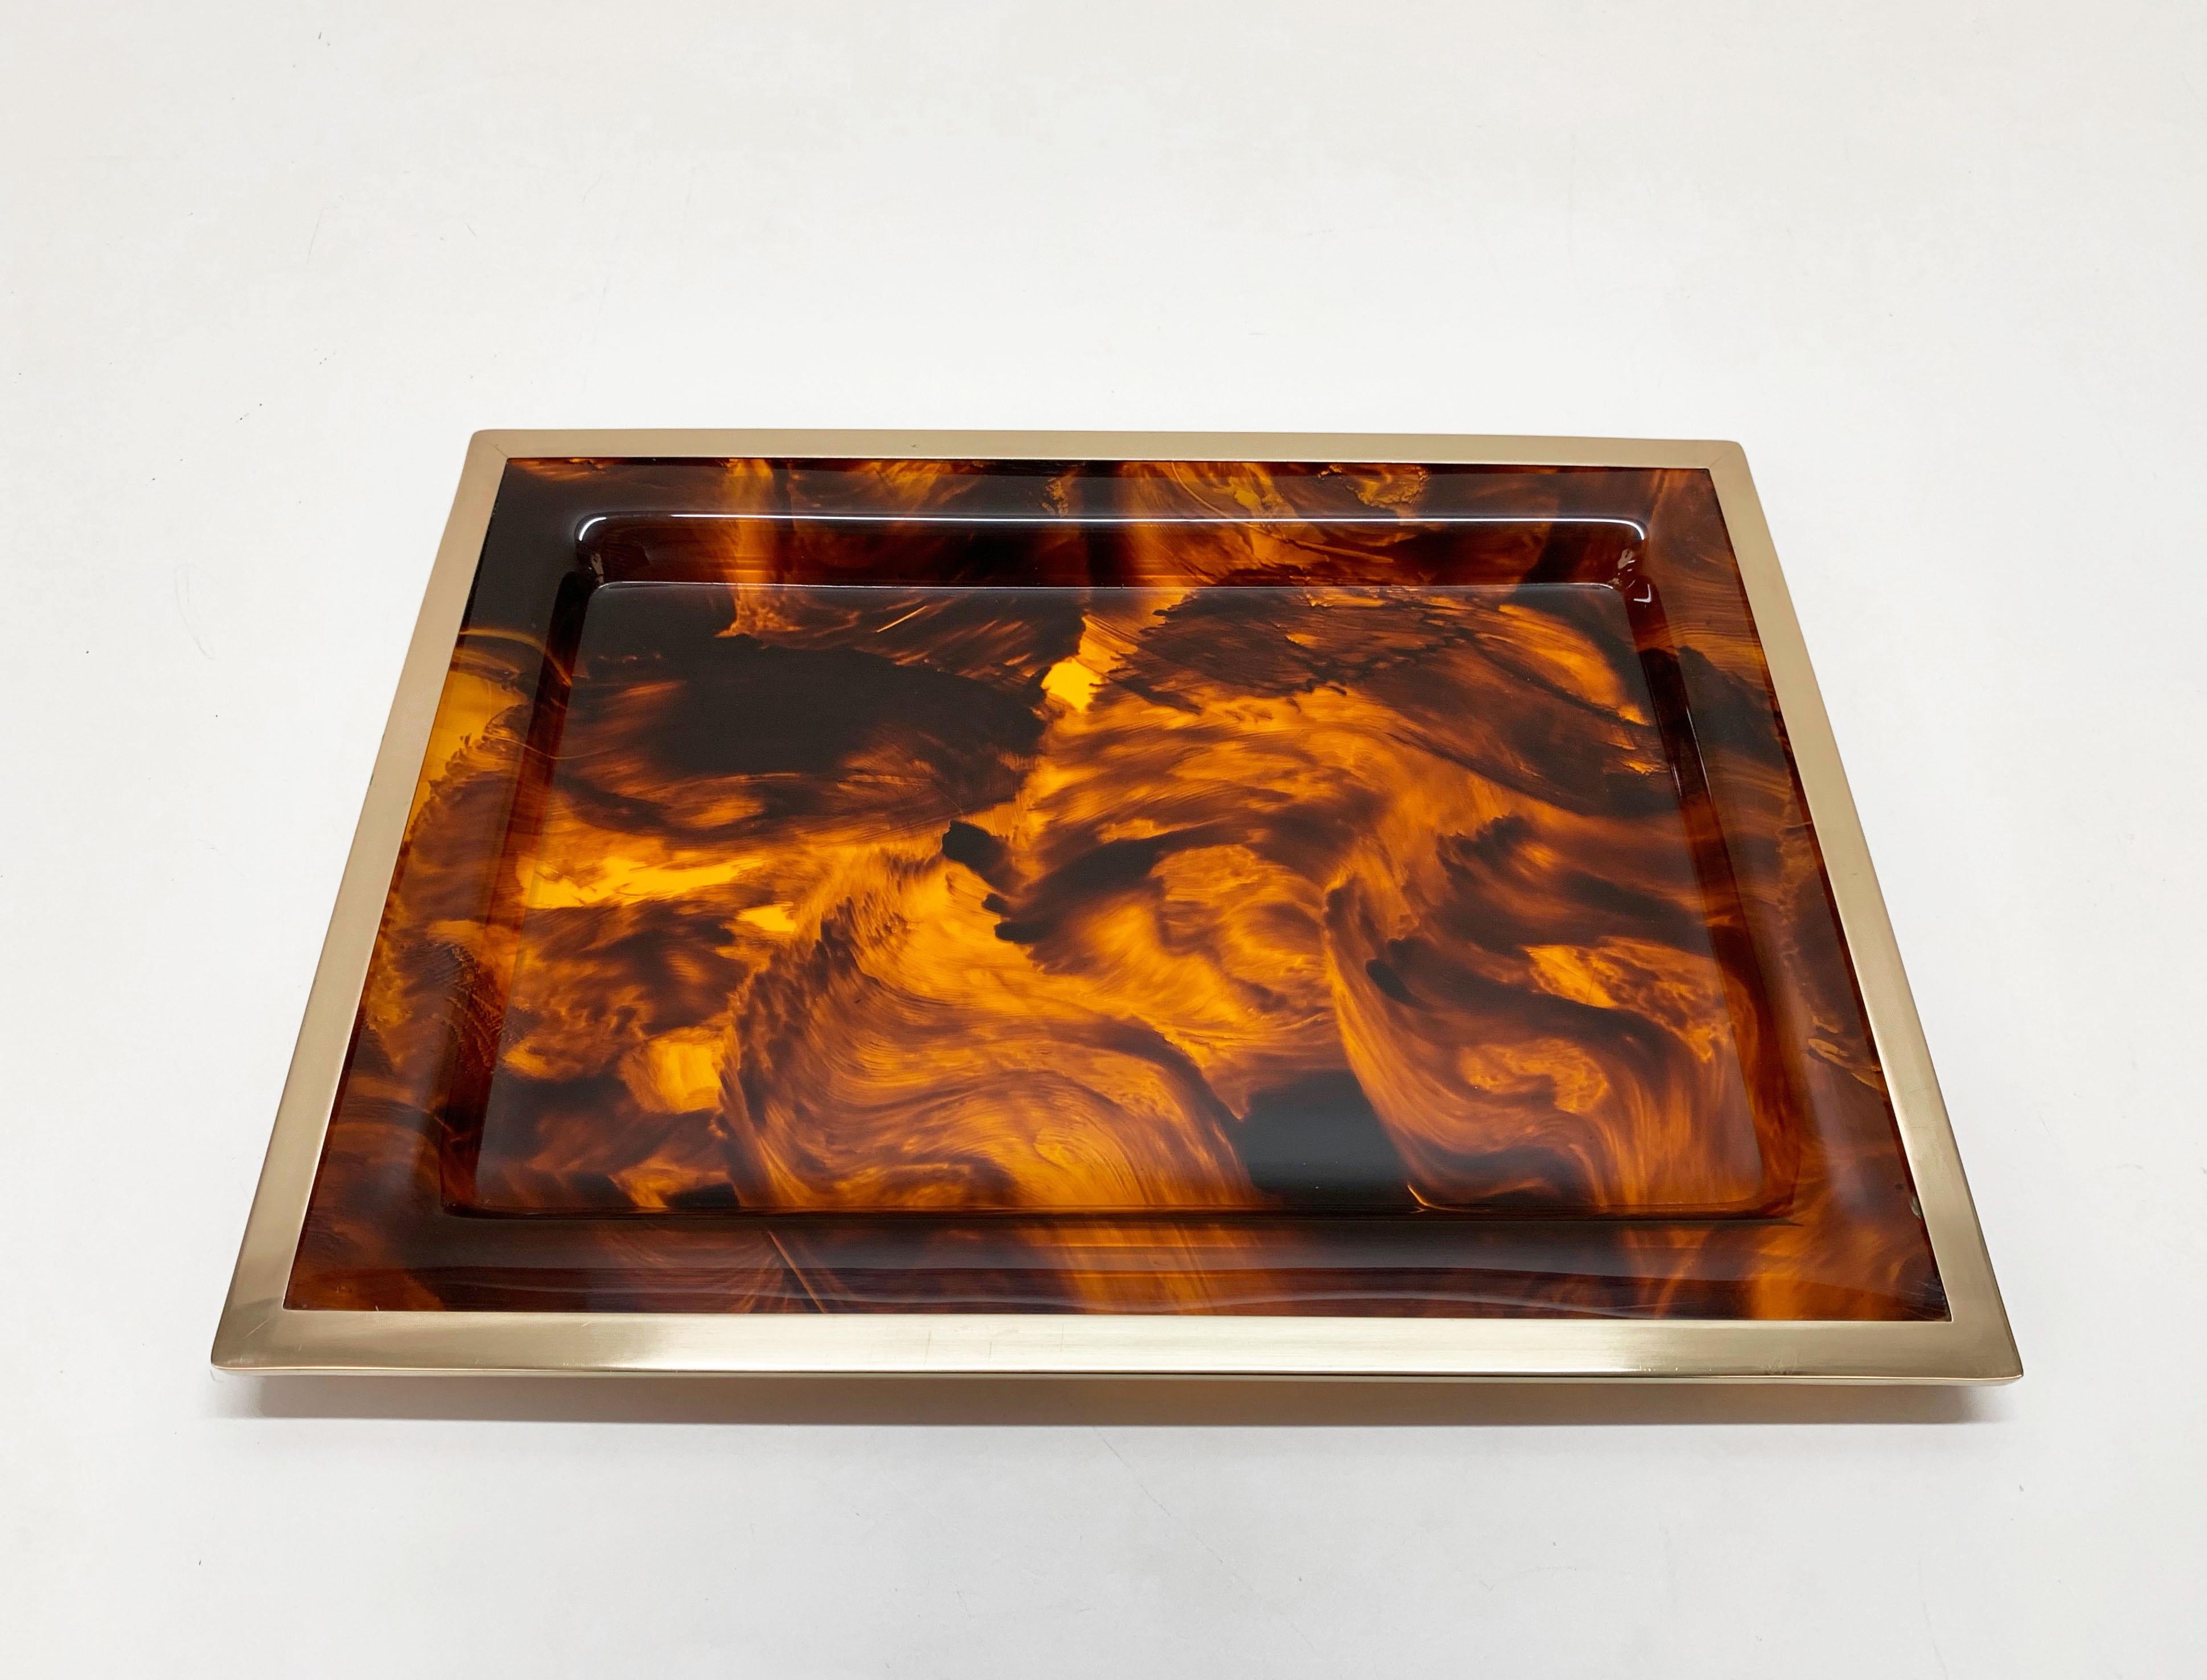 Italian Christian Dior Midcentury Lucite and Brass Serving Tray Willy Rizzo, Italy 1970s